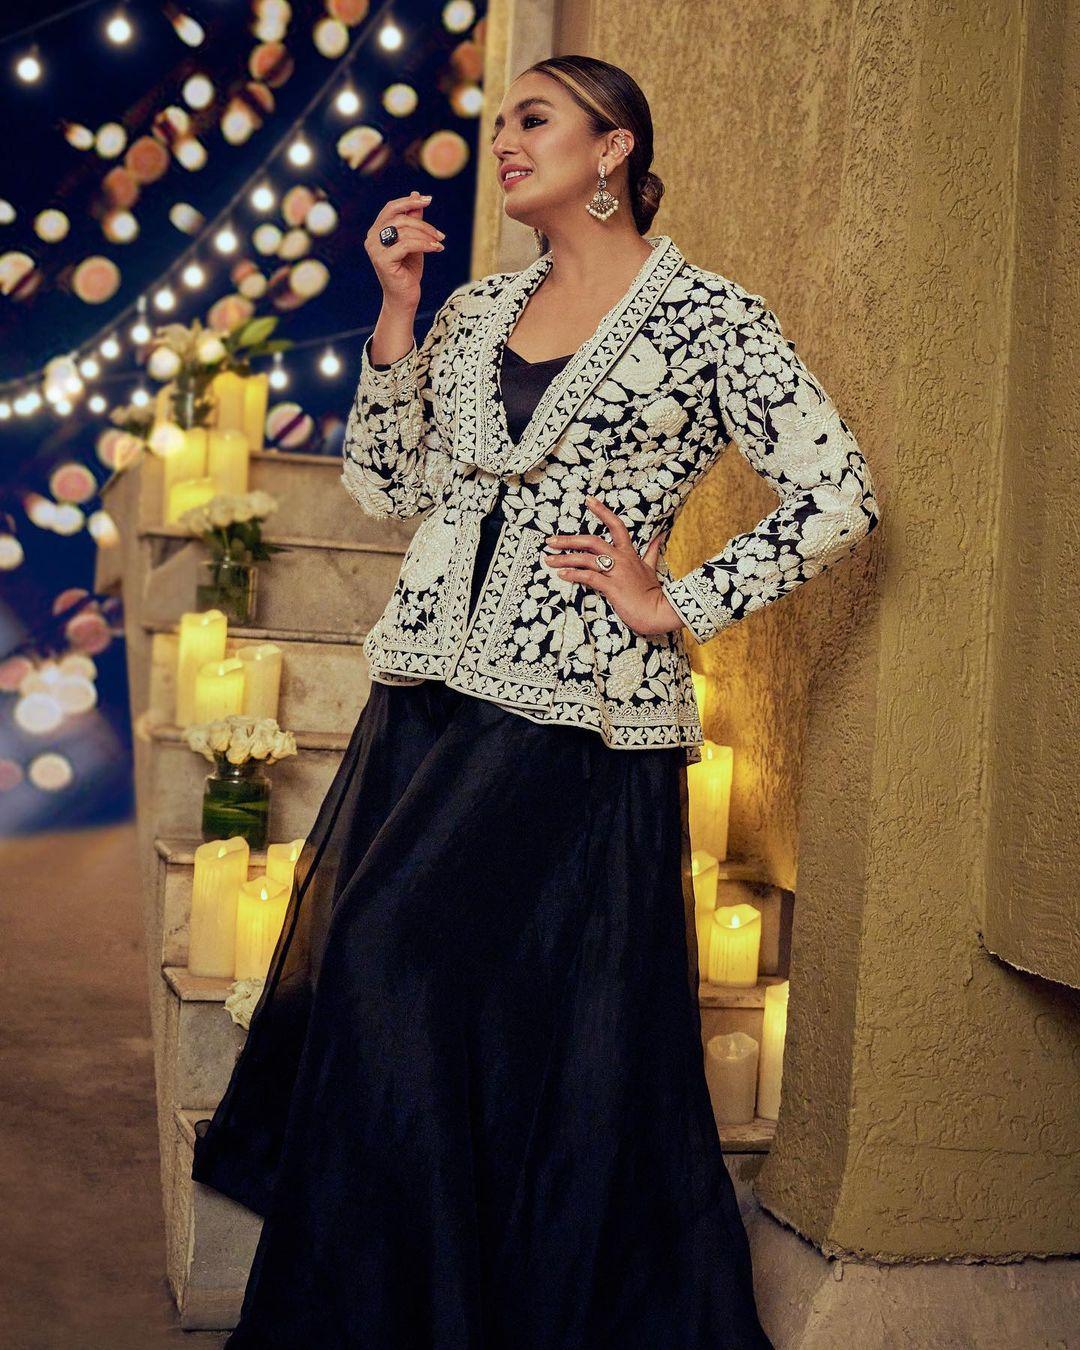 Huma Qureshi's stunning black and white Indo-western dress can be your way to escape monotony of tradition fits
 